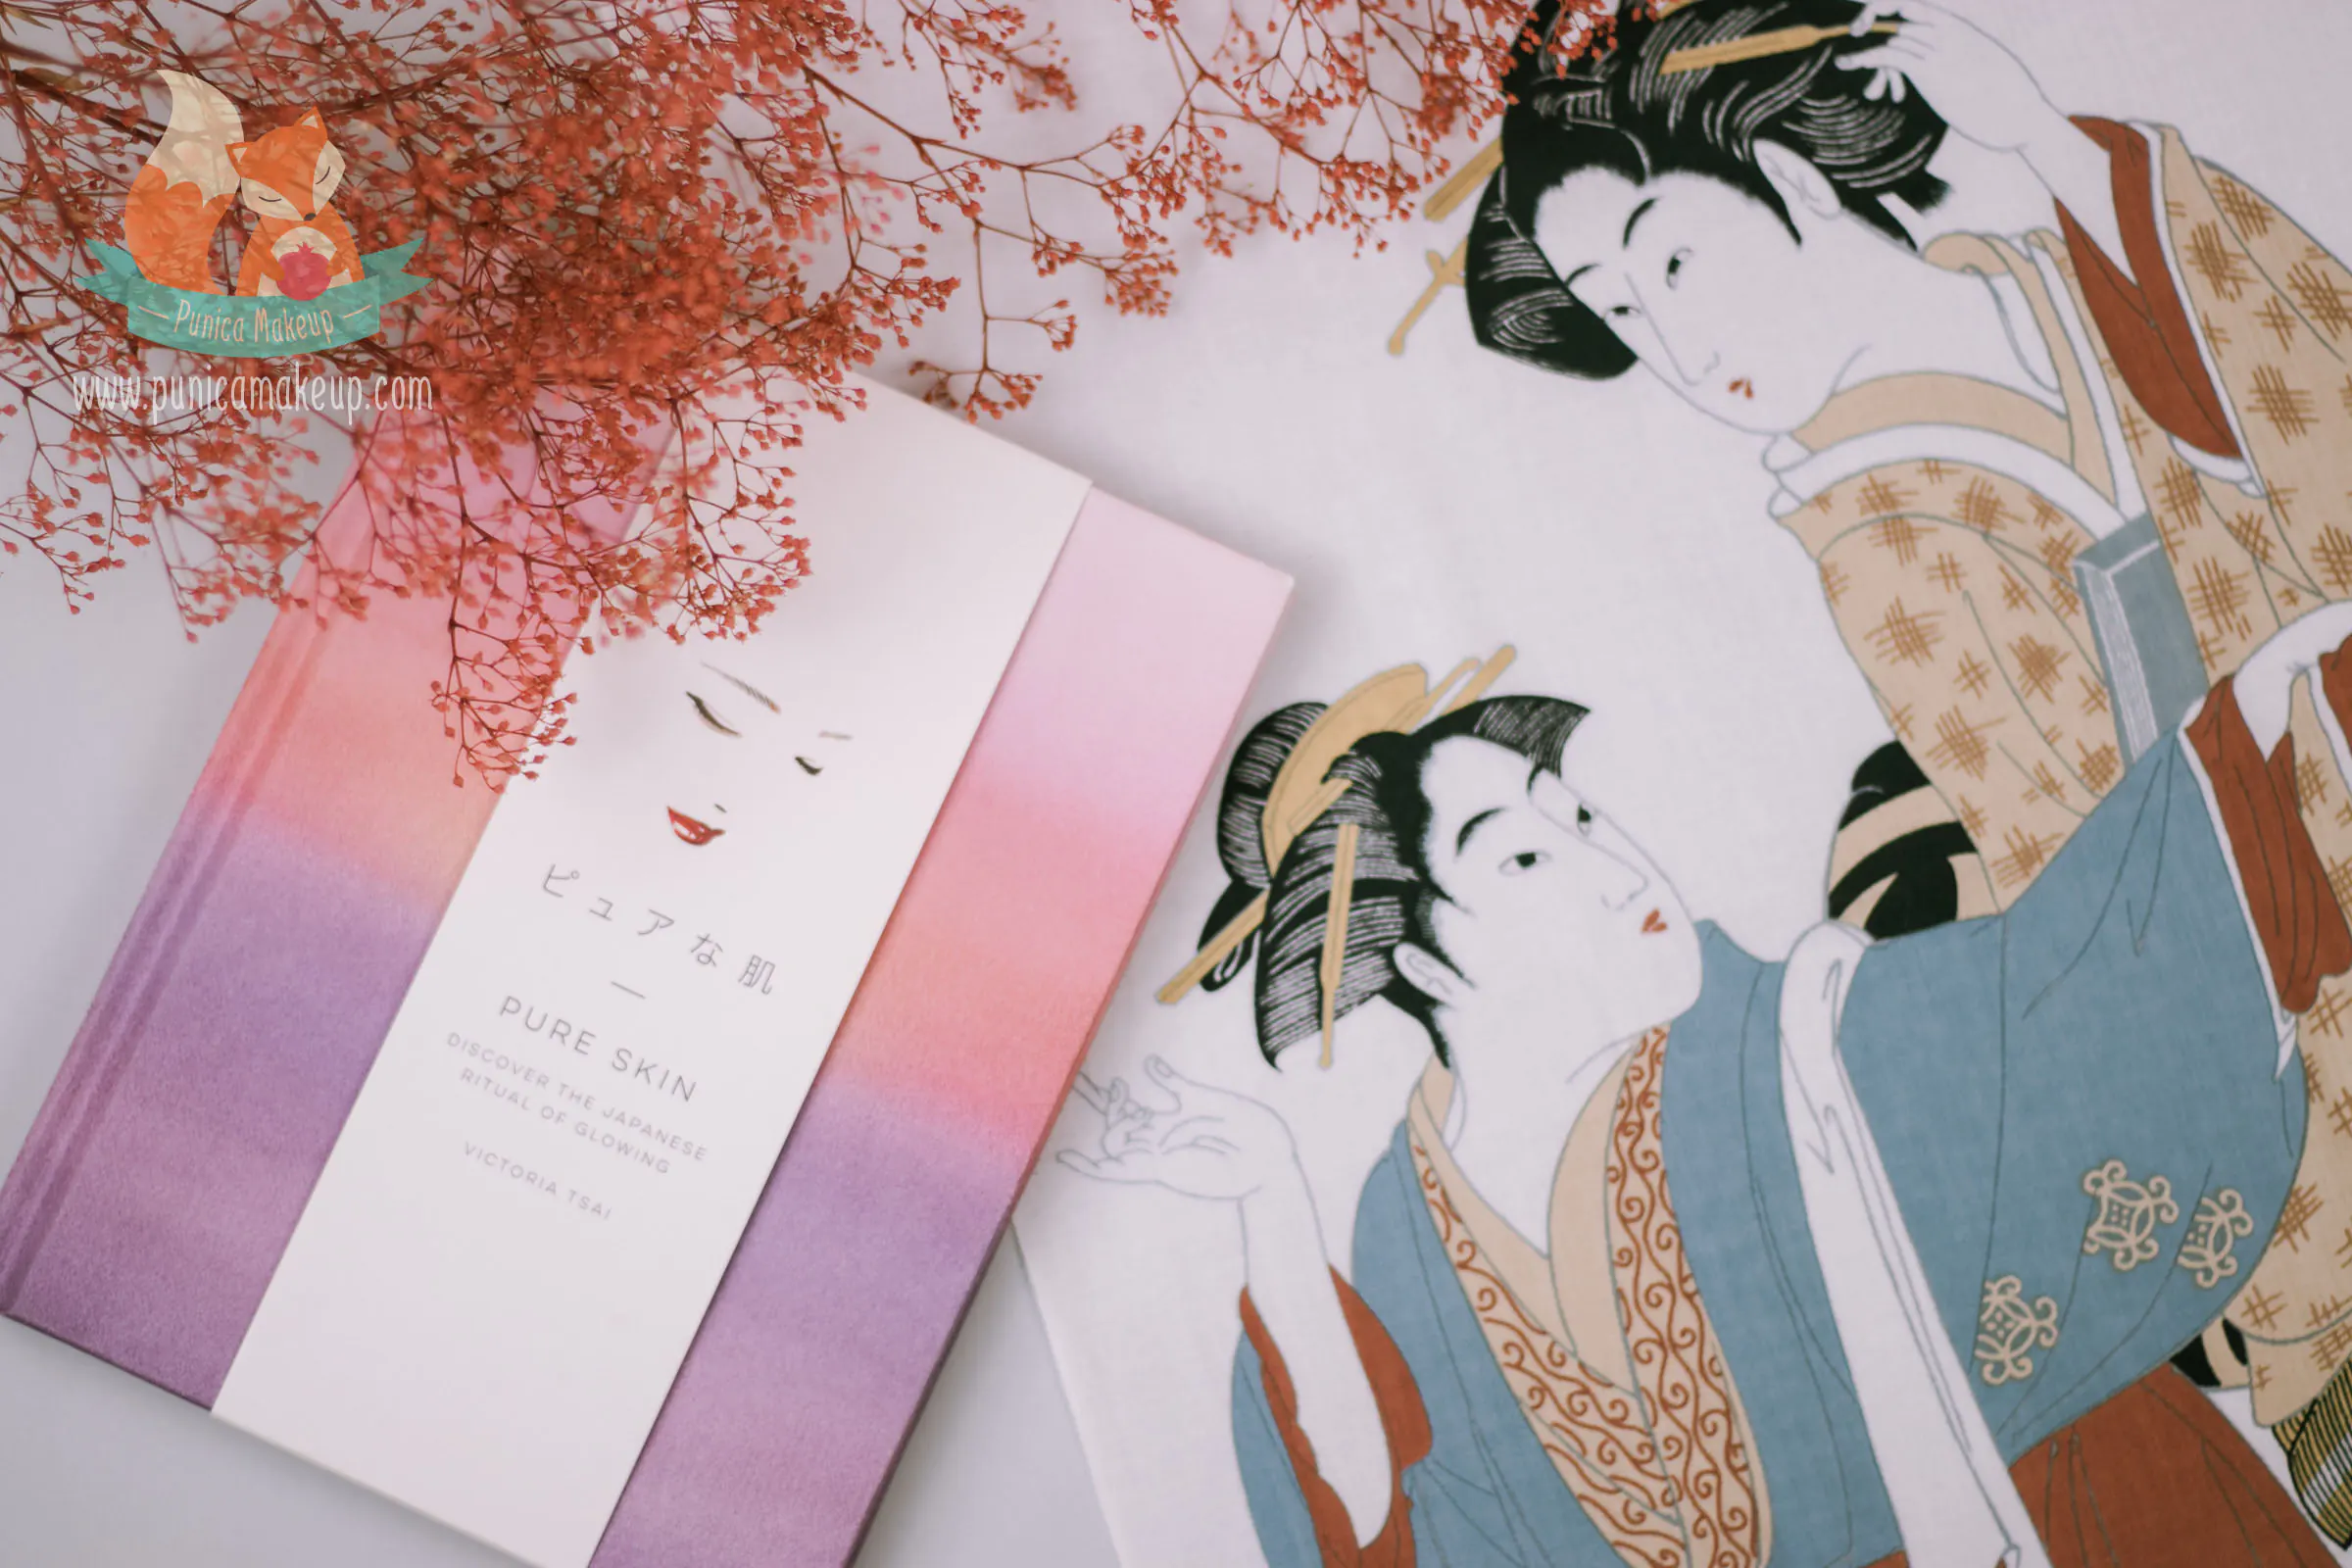 Pure Skin Discover the Japanese Ritual of Glowing by Victoria Tsai